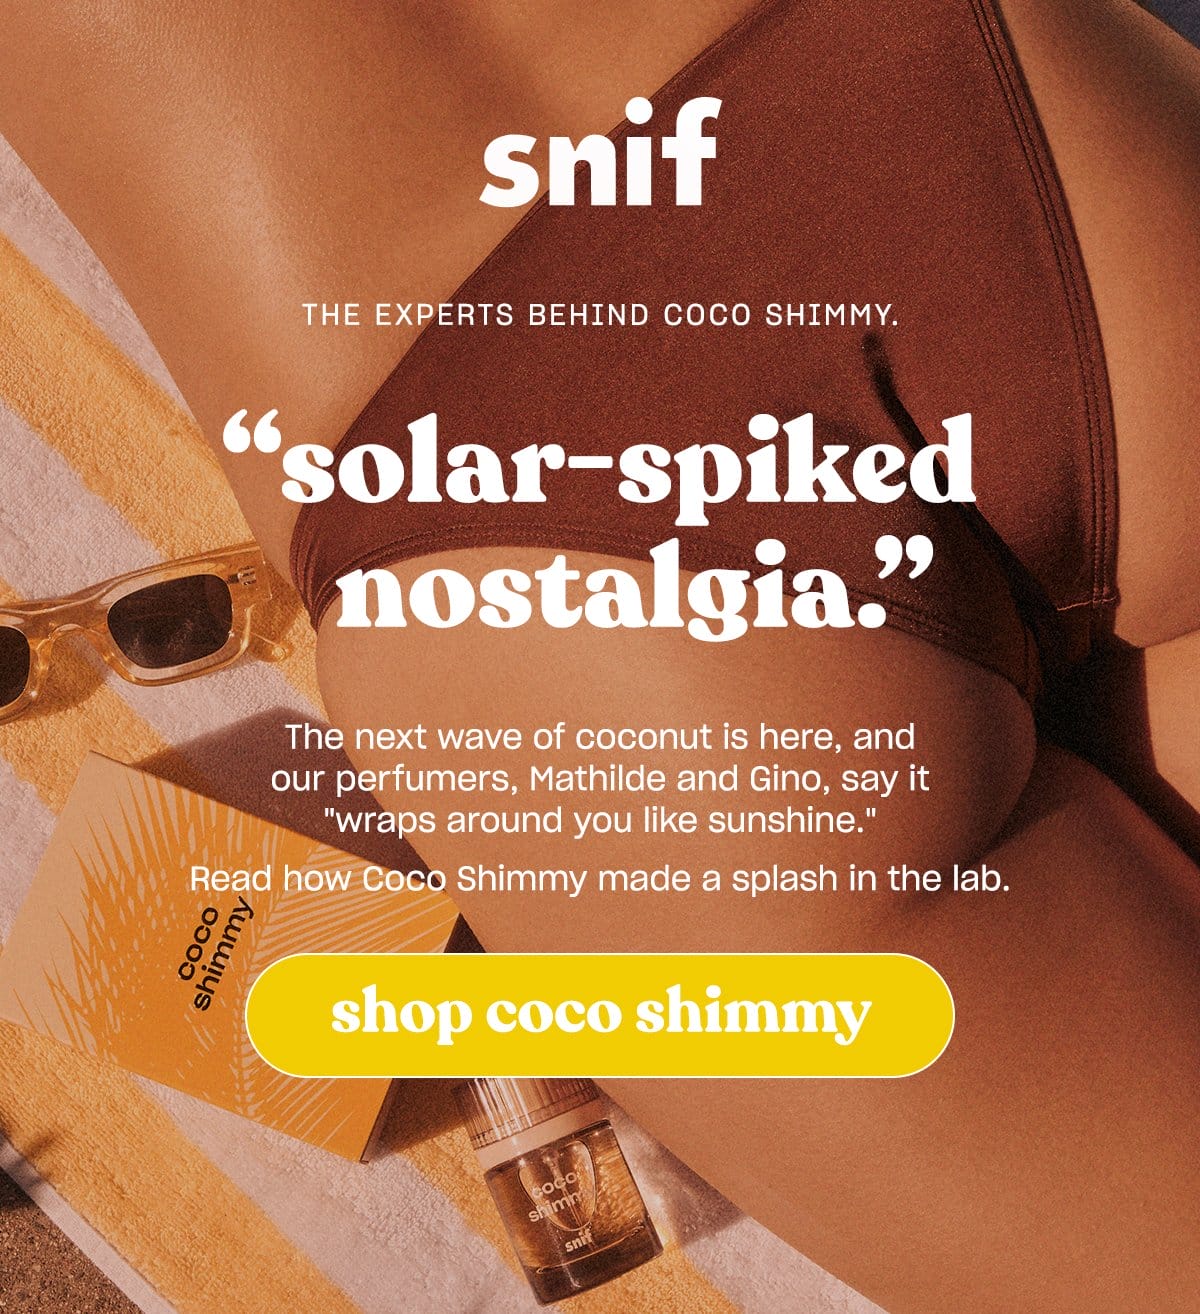 The next wave of coconut is here, and our perfumers, Mathilde and Gino, say it “wraps around you like sunshine.” Read how Coco Shimmy made a splash in the lab.. [Shop coco shimmy]